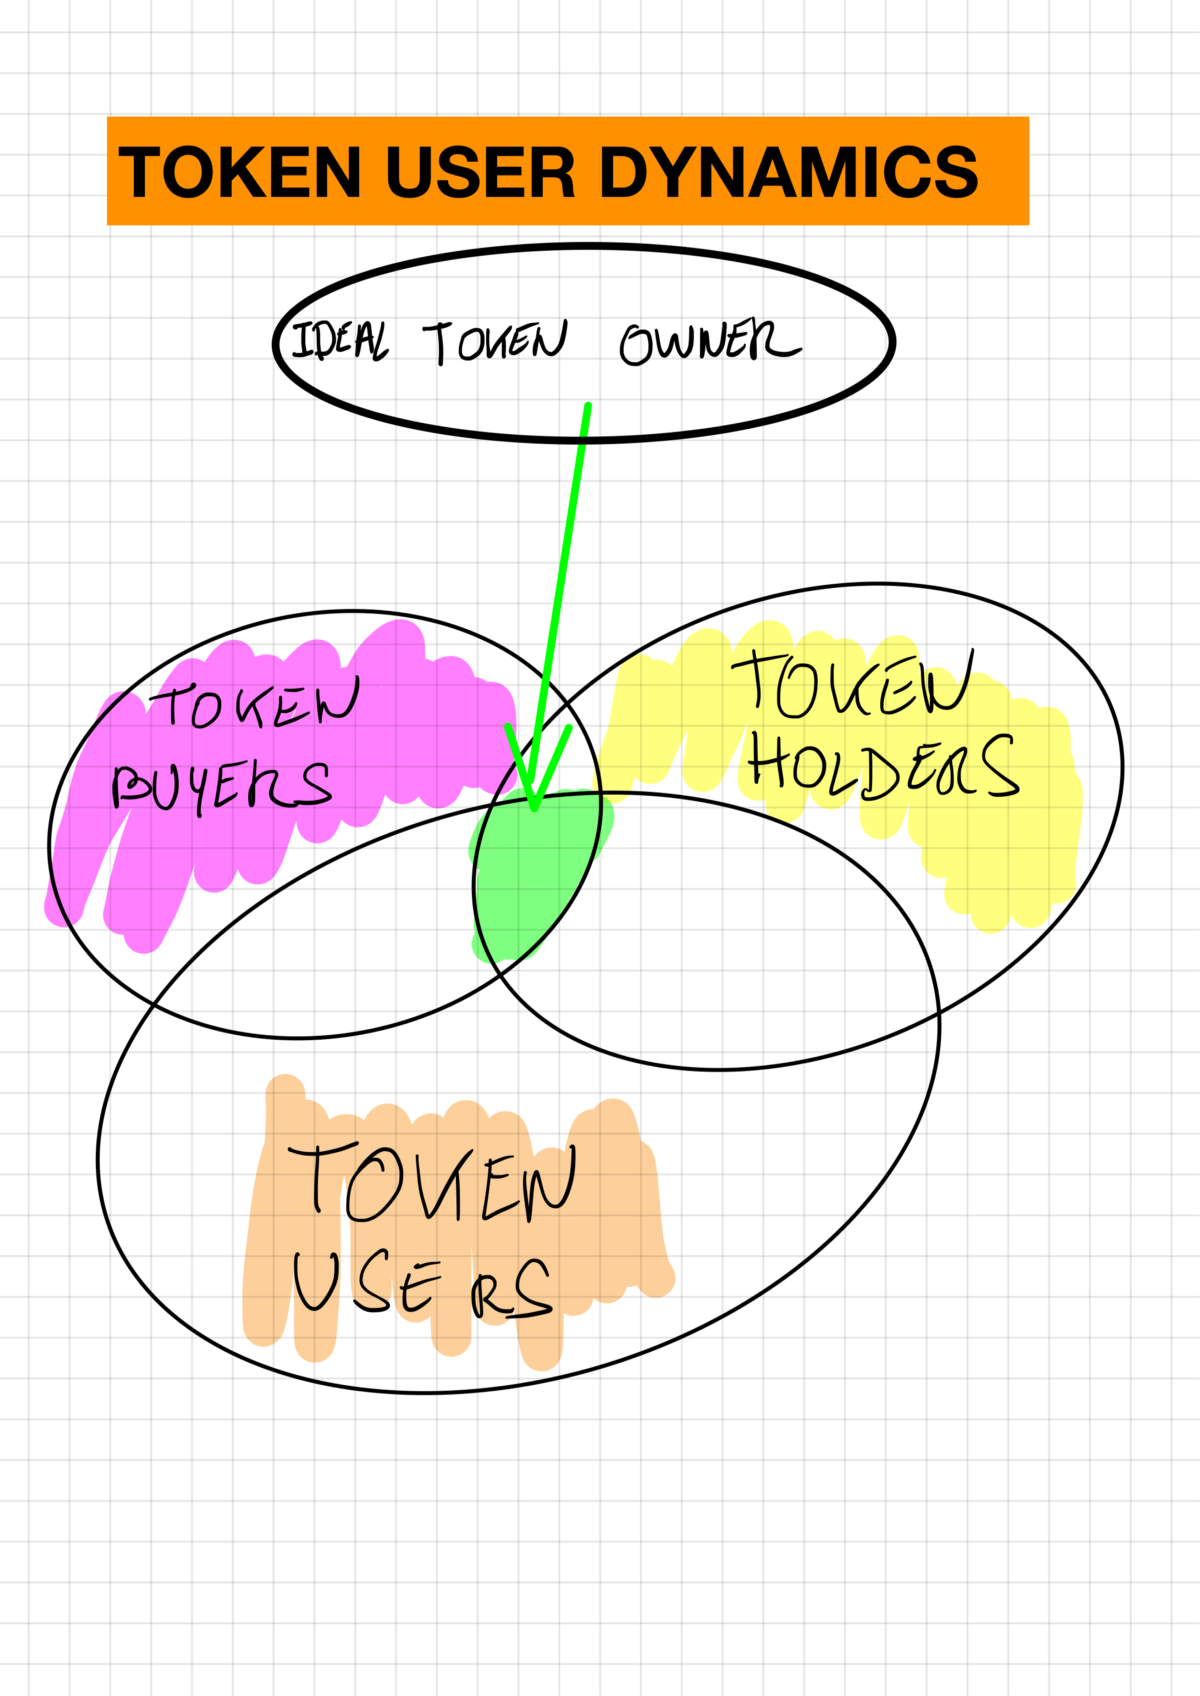 TokenIntersection.png